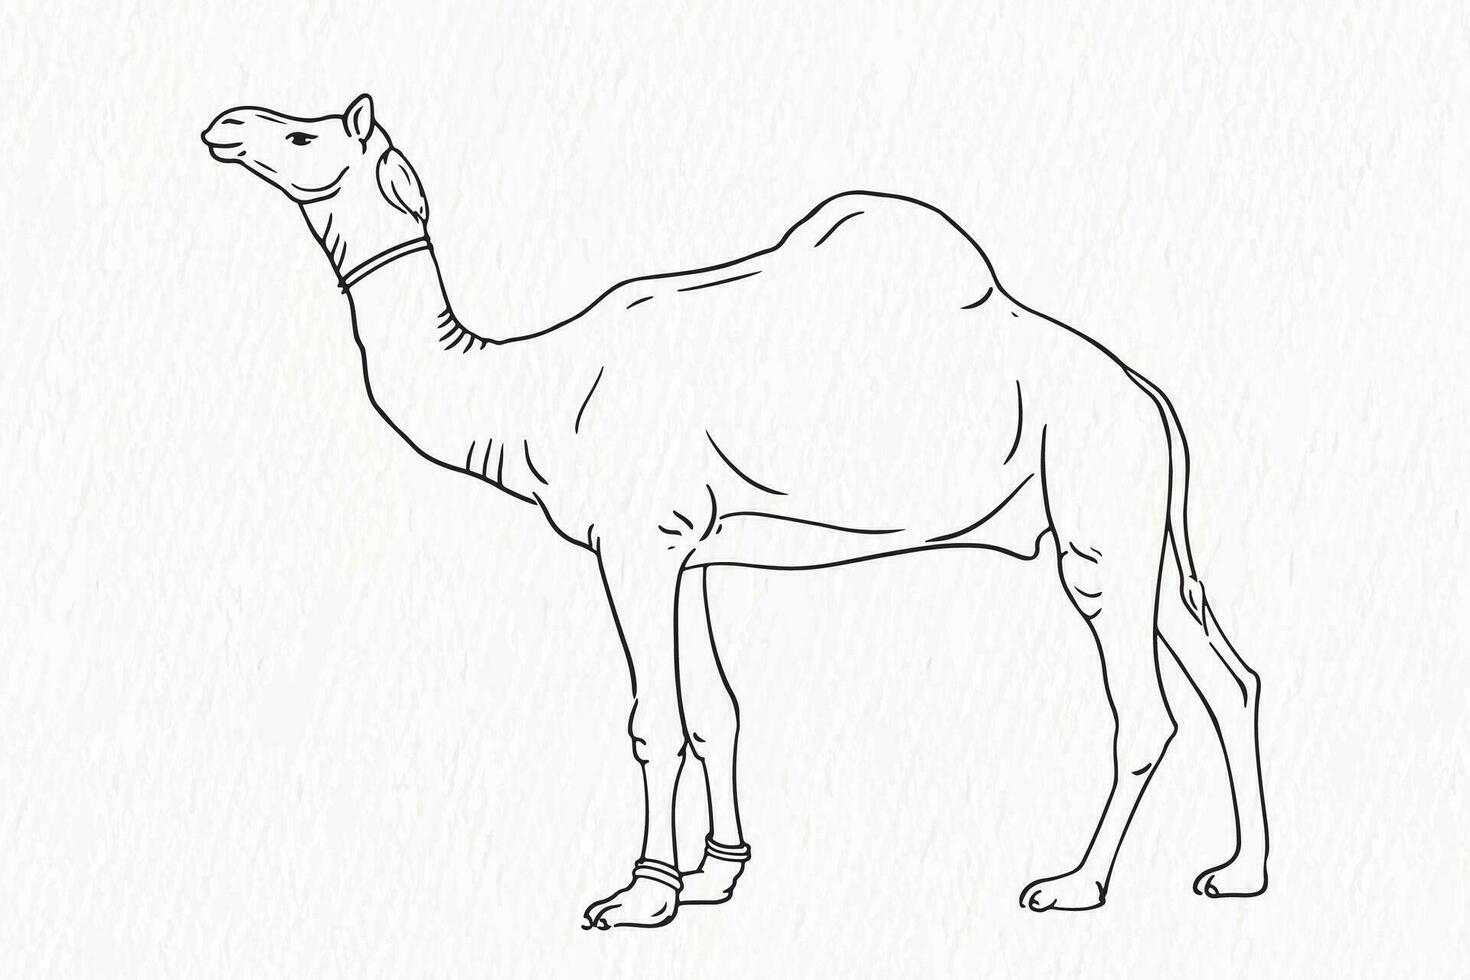 Domestic animal line drawing. Camel for qurbani outline vector